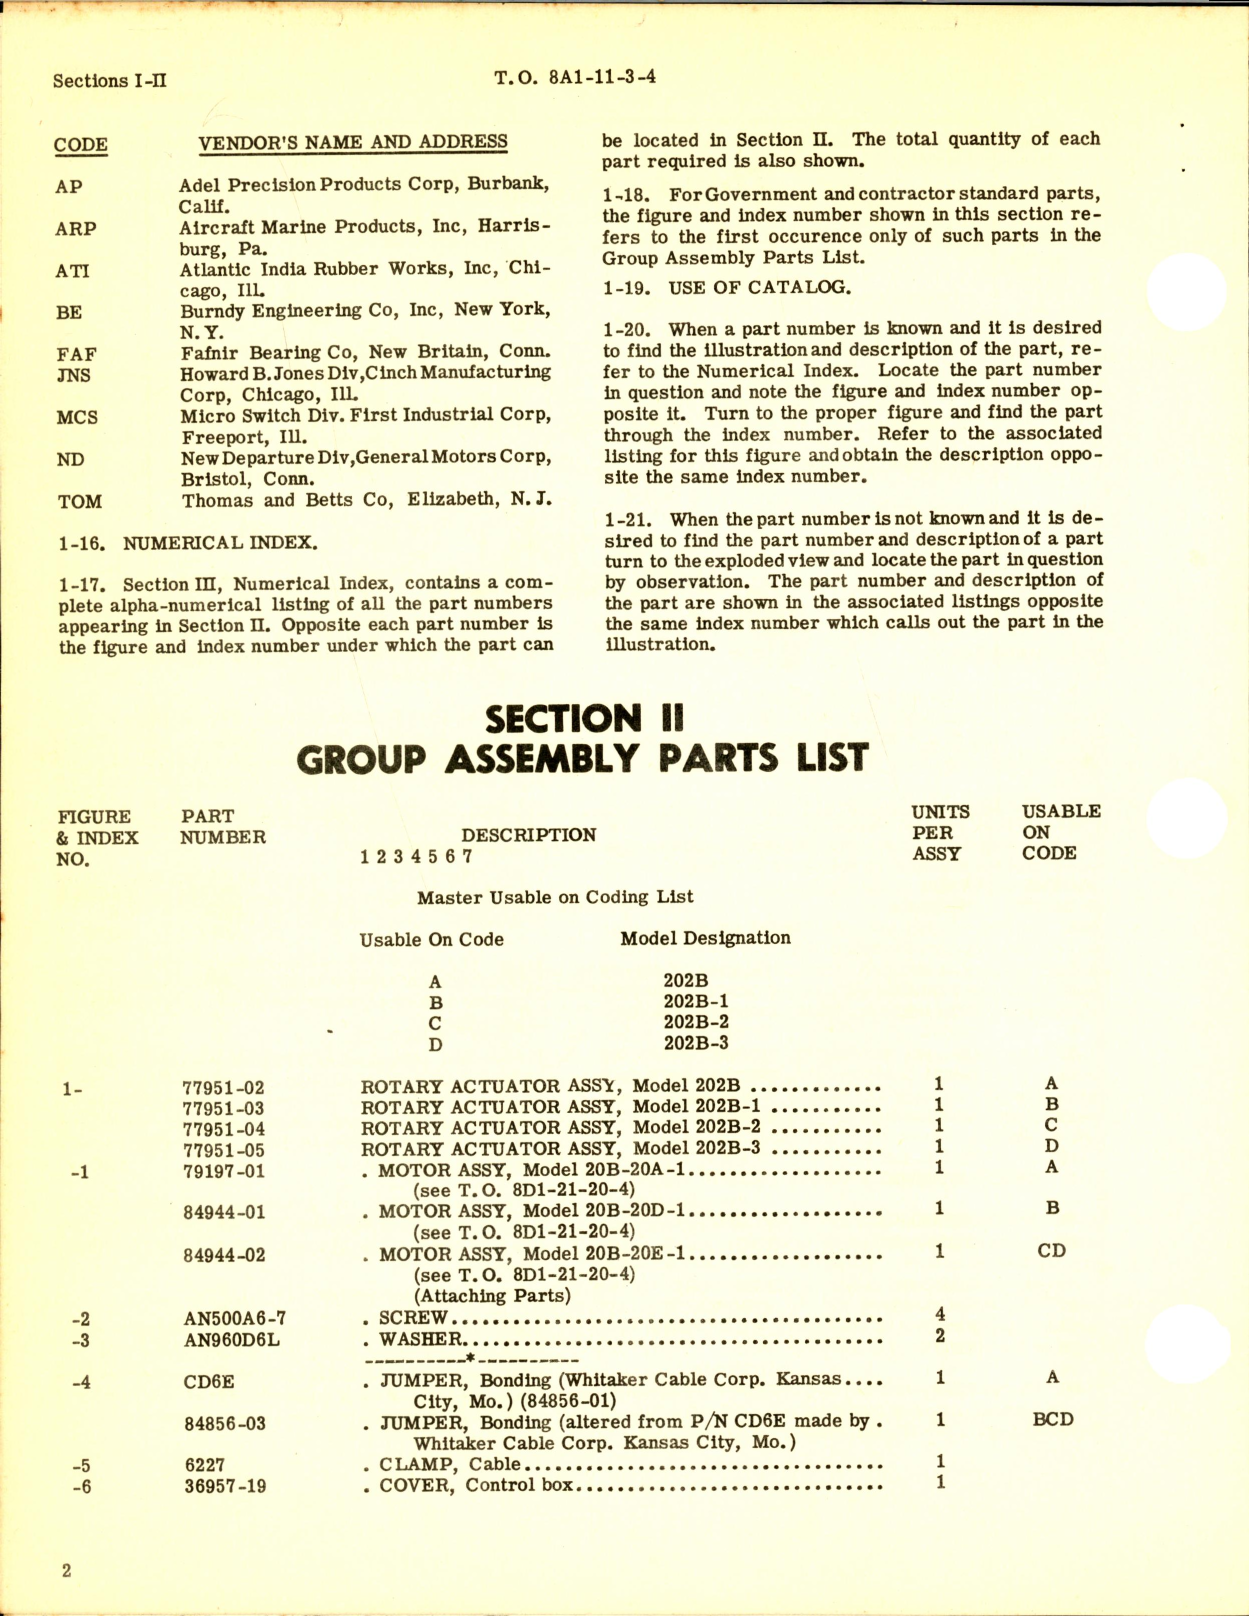 Sample page 4 from AirCorps Library document: Illustrated Parts Breakdown Rotary Actuator Assembly 202 Series